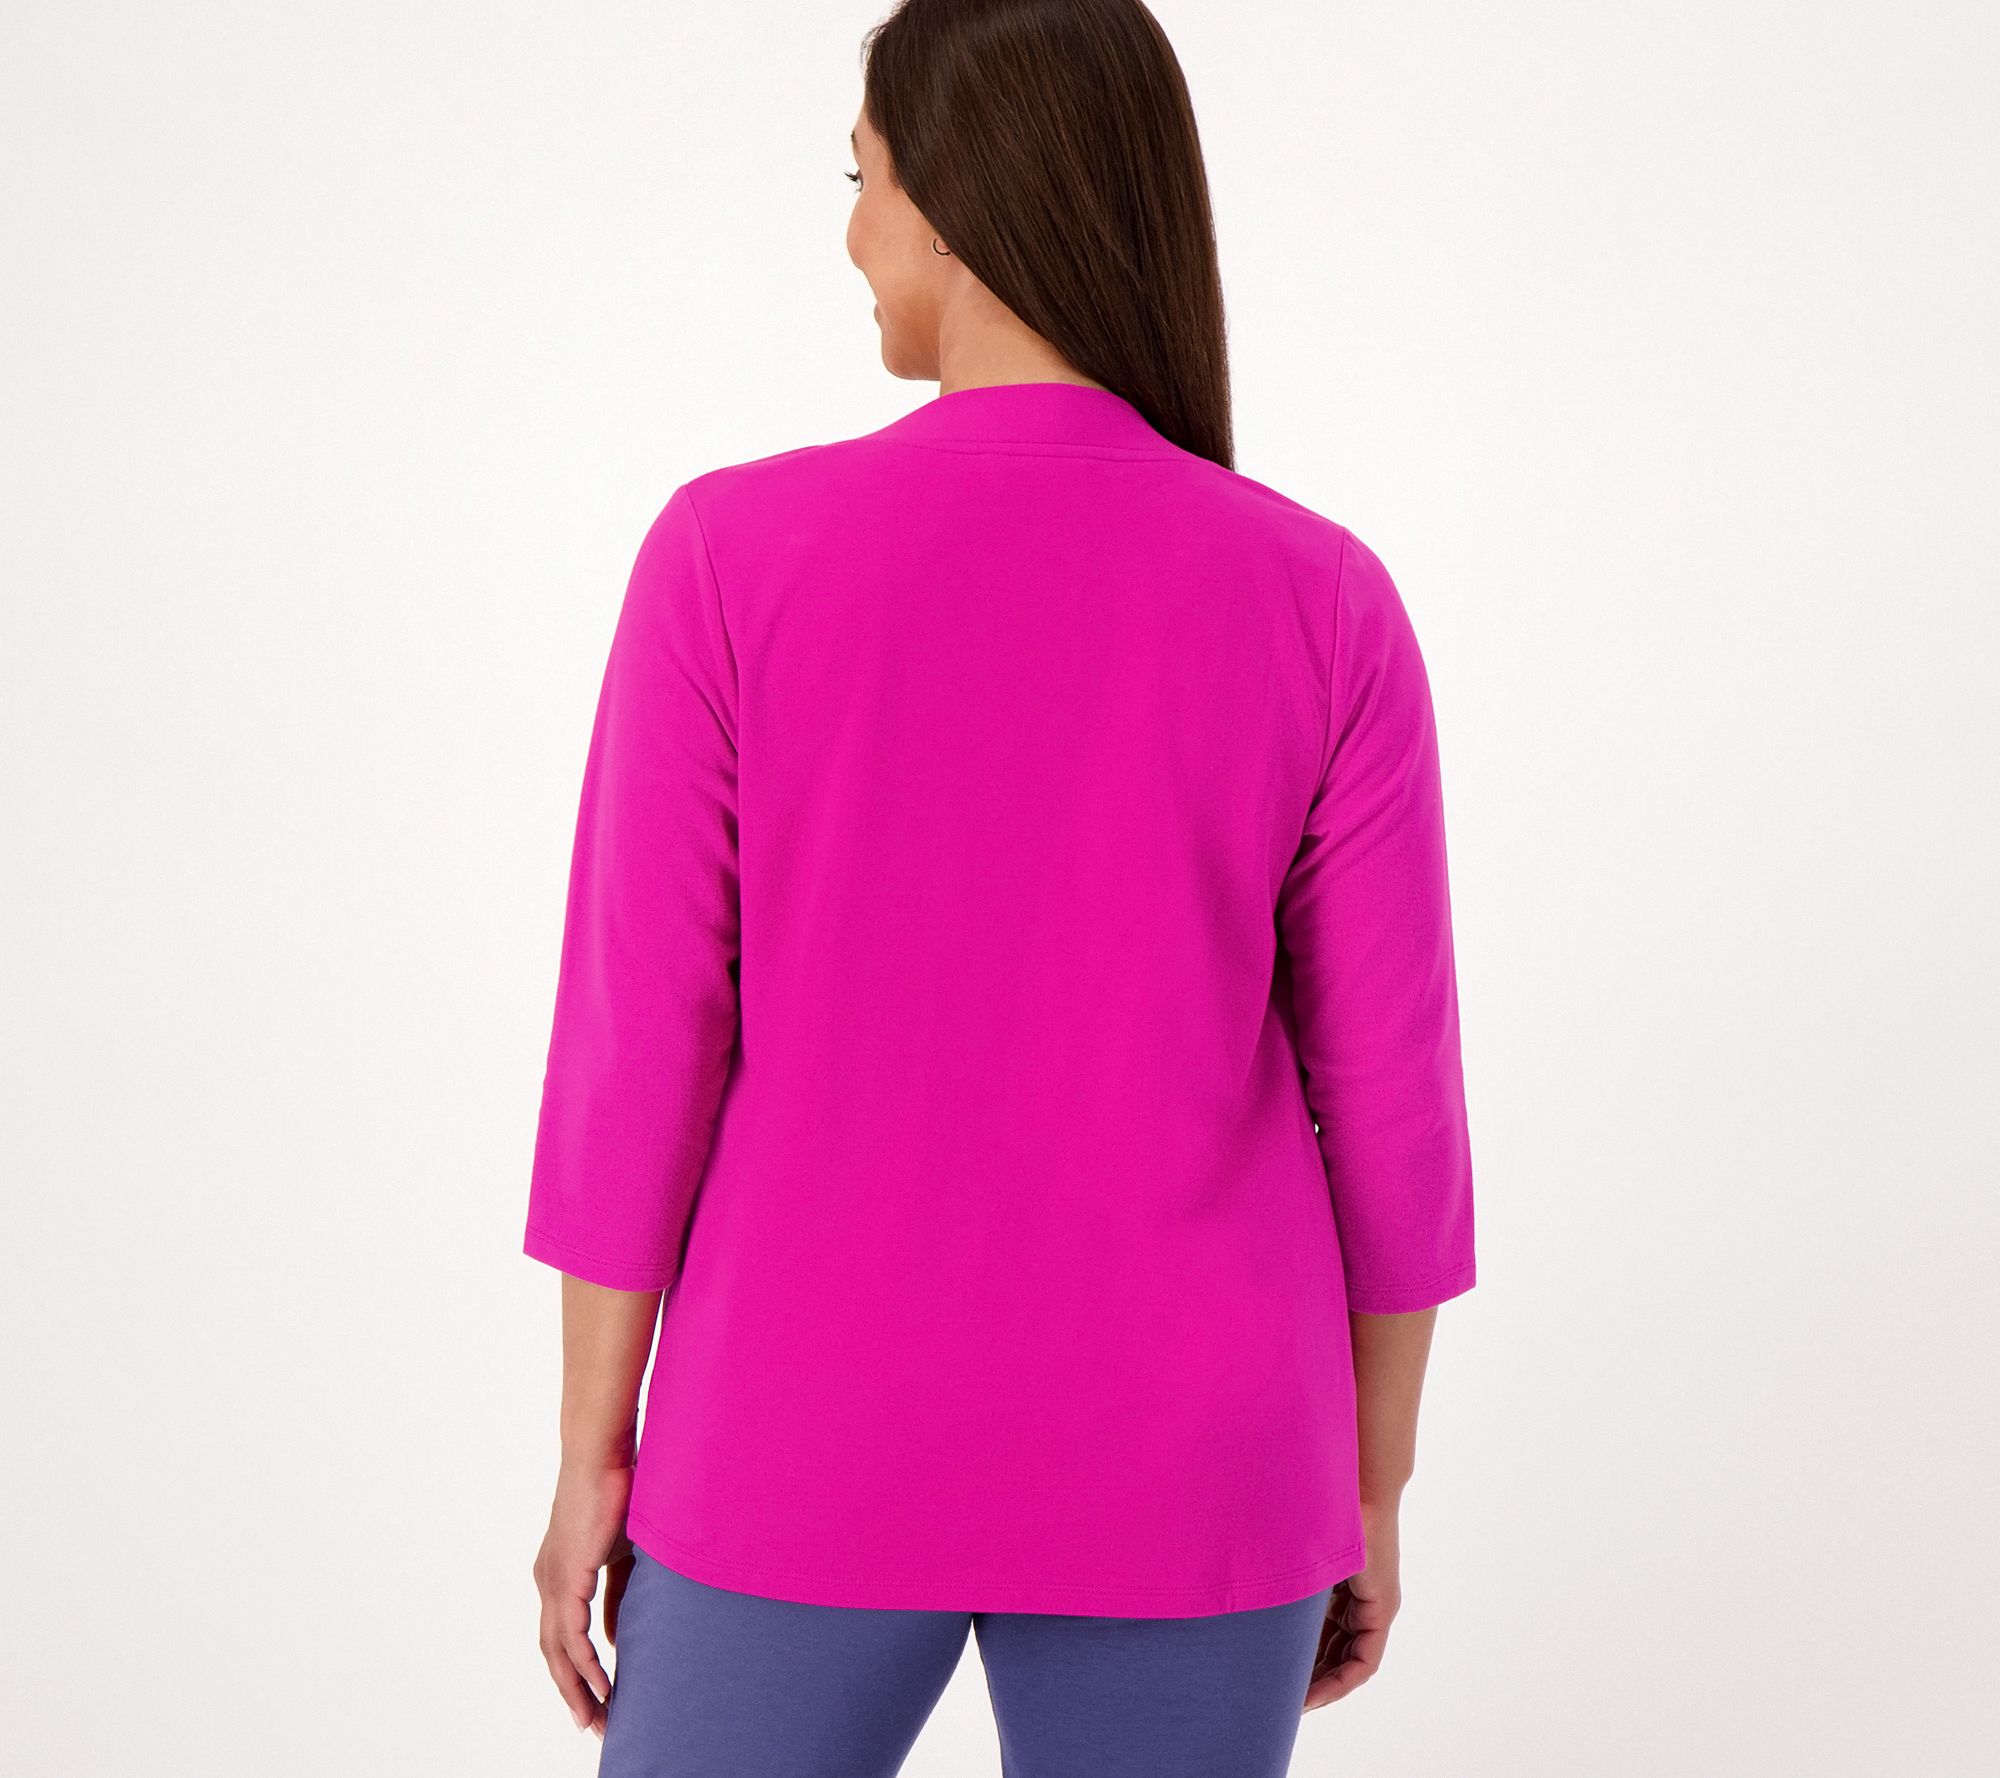 QVC has stylish activewear to kickstart your New Year's resolution